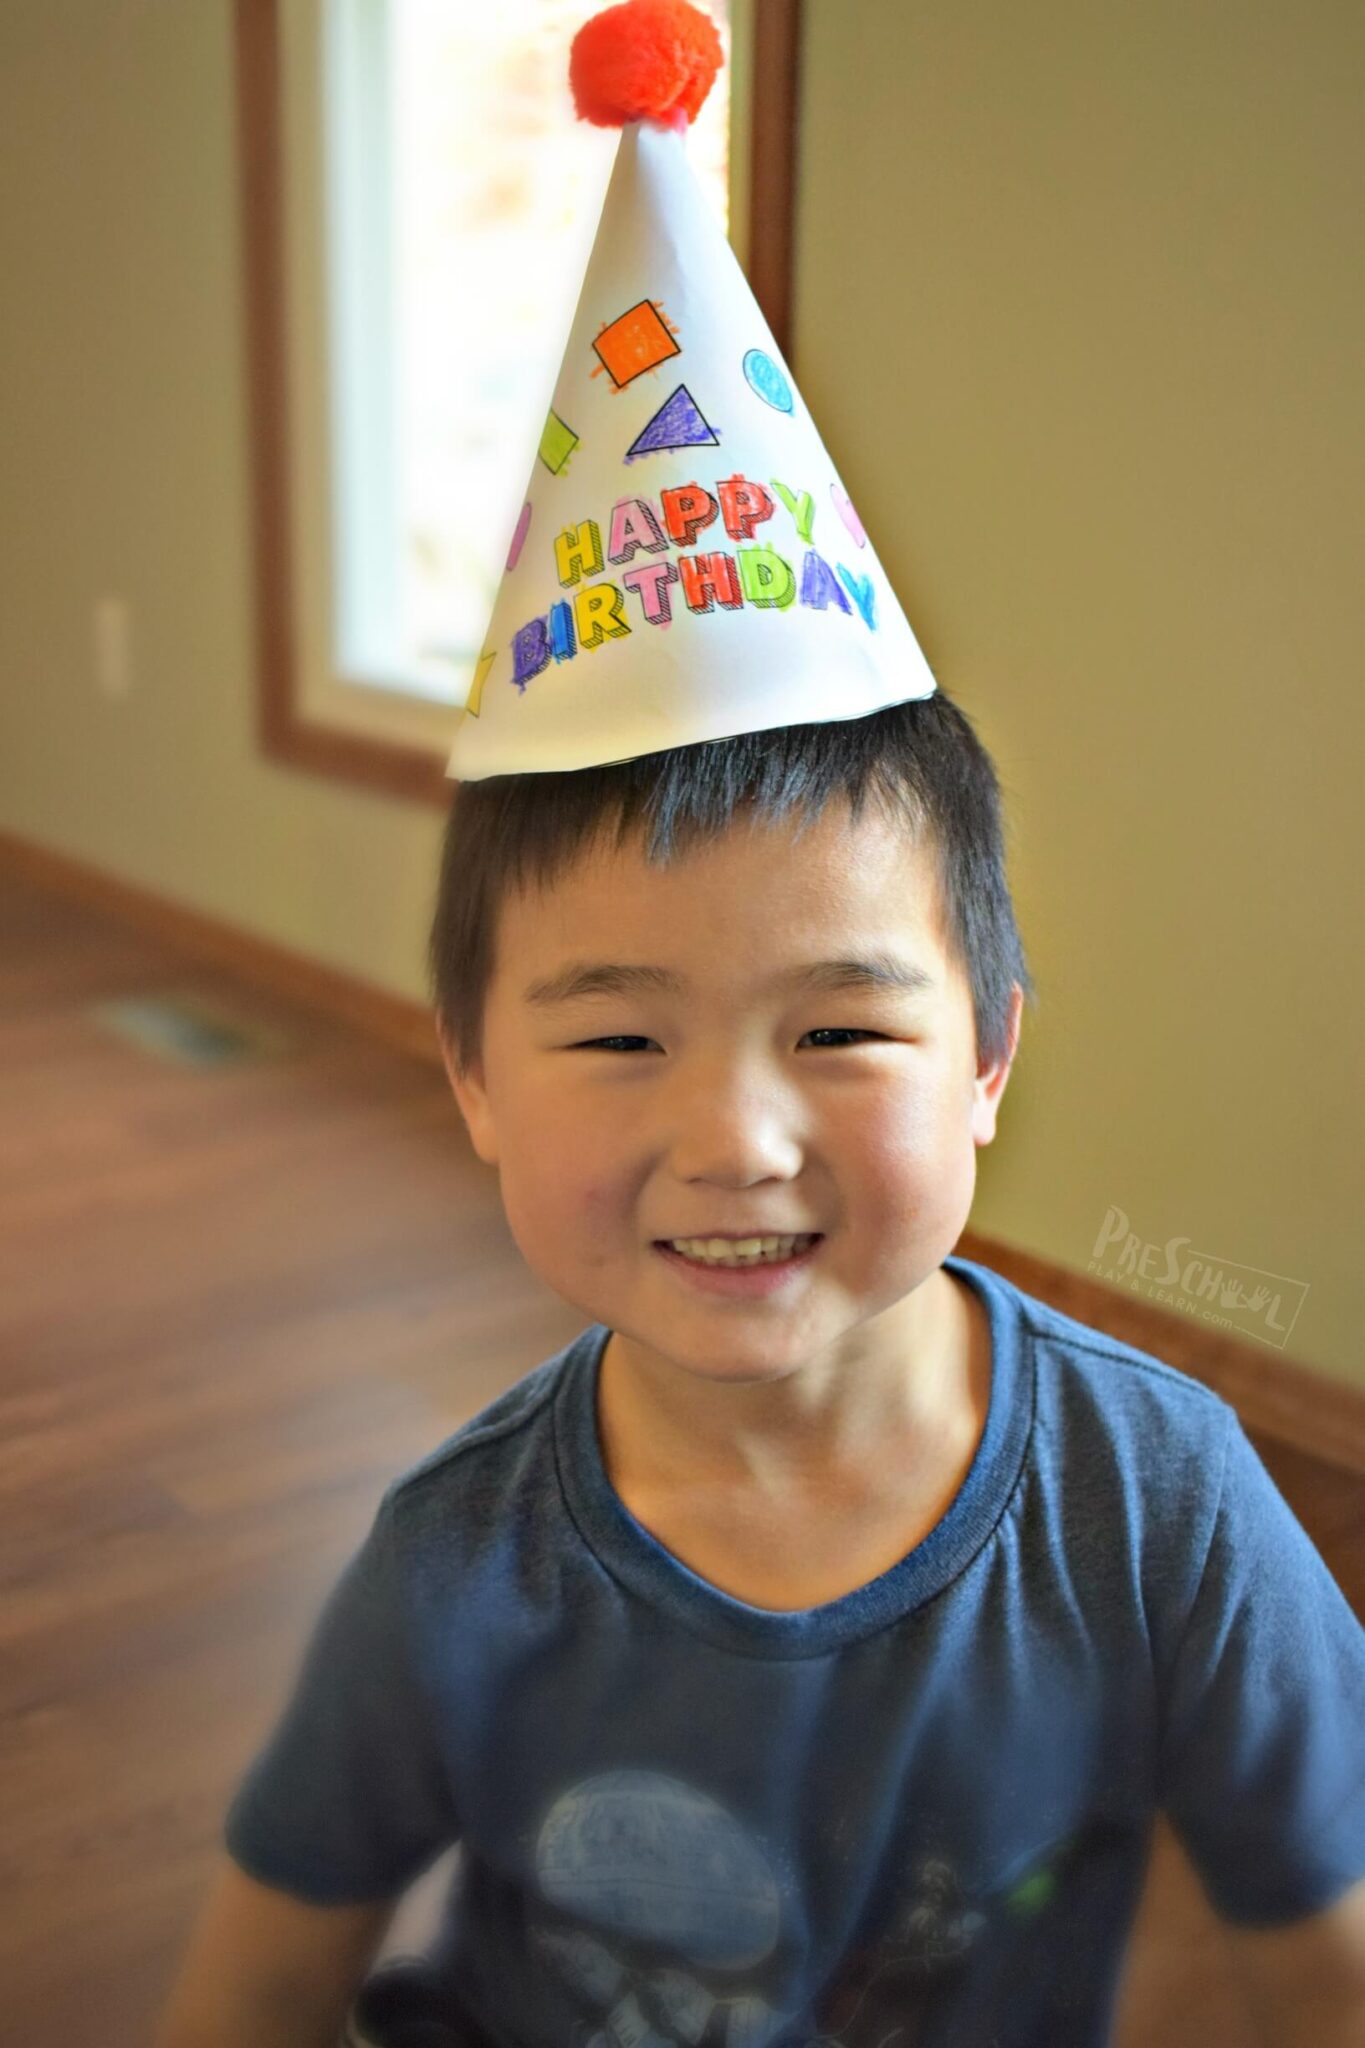  FREE Printable Birthday Hat Template For Kids